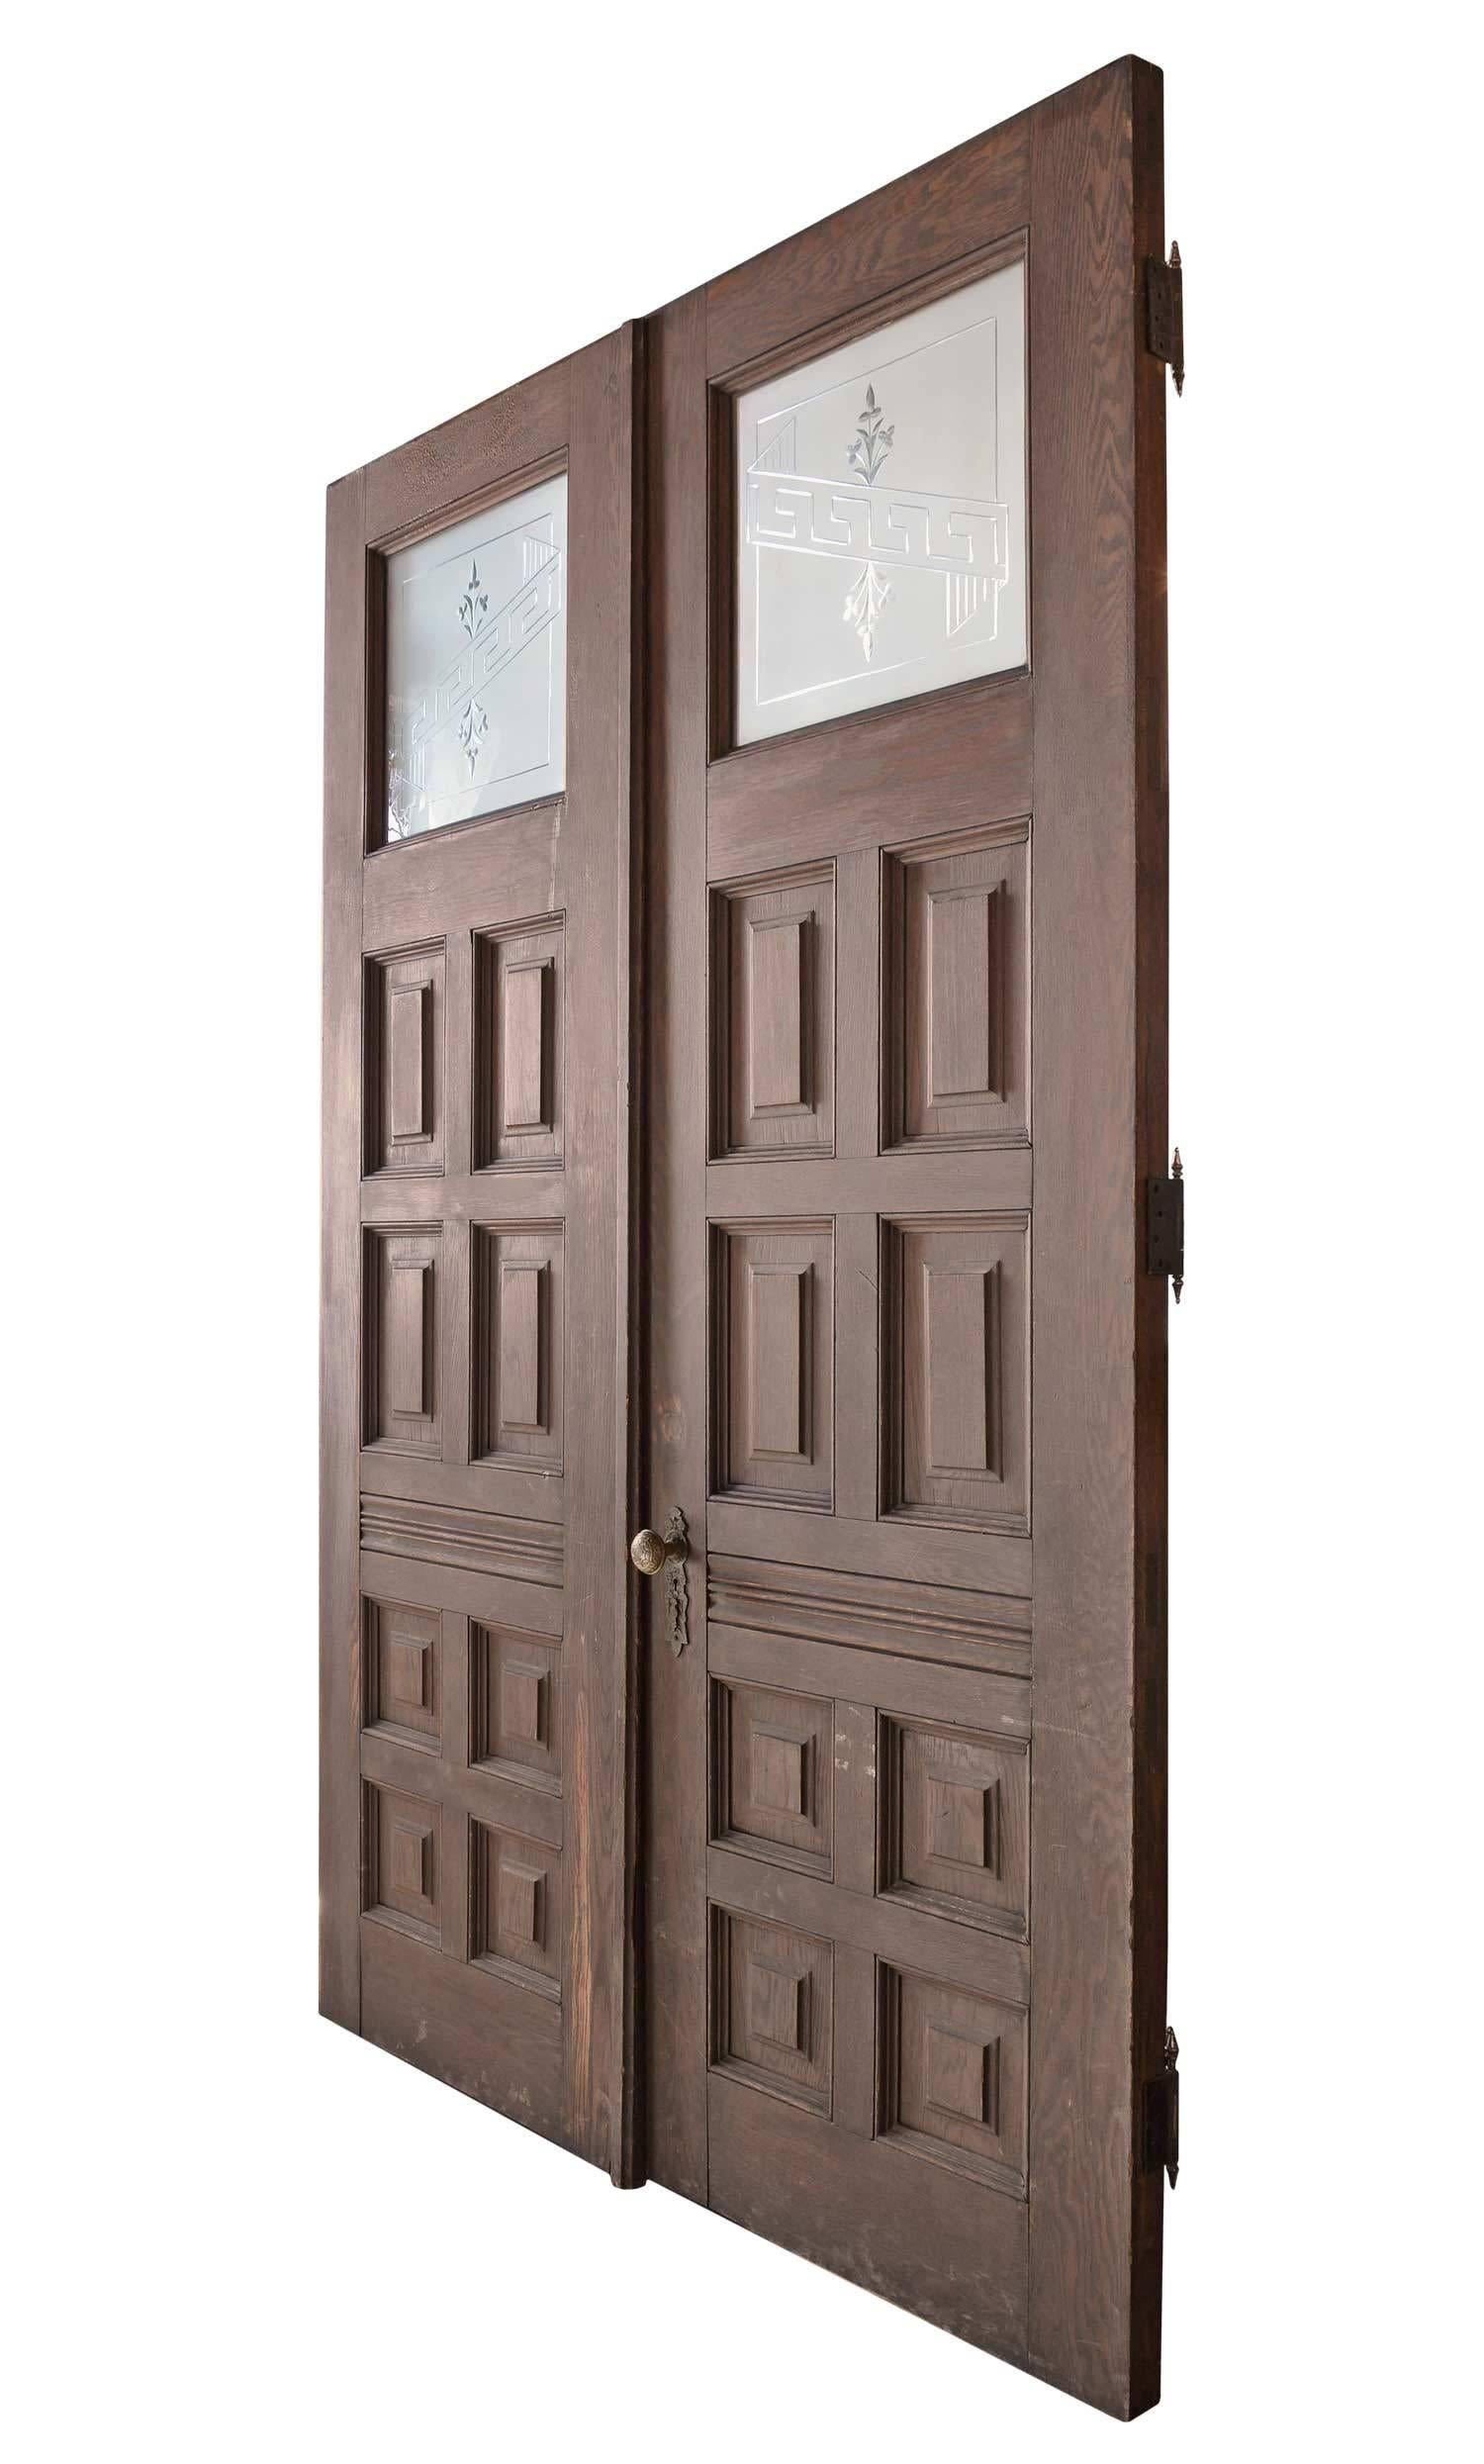 Saved from an 1870s home in Lacrosse, Wisconsin, this pair of doors have stood the test of time. Grand in scale and size, each door is 30" wide x 94" tall. Both the exterior and interior sides retain their original finish. The exterior oak